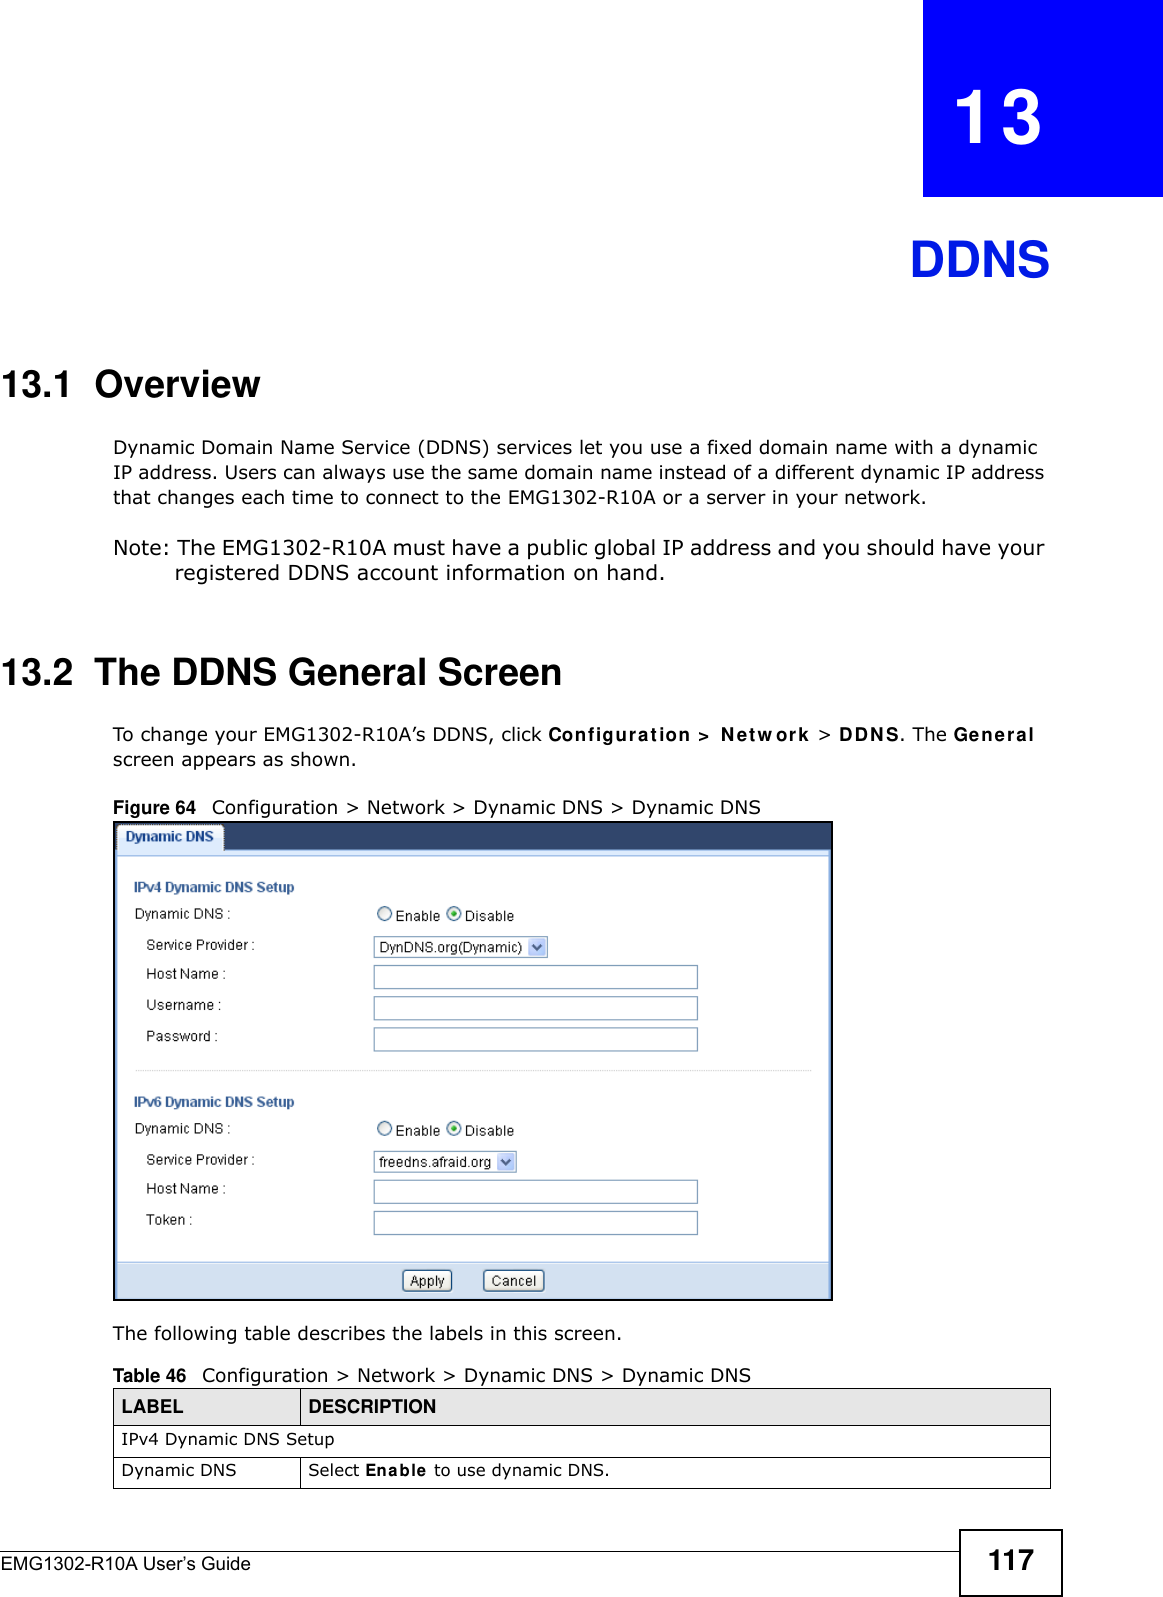 EMG1302-R10A User’s Guide 117CHAPTER   13DDNS13.1  Overview Dynamic Domain Name Service (DDNS) services let you use a fixed domain name with a dynamic IP address. Users can always use the same domain name instead of a different dynamic IP address that changes each time to connect to the EMG1302-R10A or a server in your network.Note: The EMG1302-R10A must have a public global IP address and you should have your registered DDNS account information on hand.13.2  The DDNS General Screen To change your EMG1302-R10A’s DDNS, click Configur a t ion &gt;  Net w or k  &gt; D D N S. The Genera l screen appears as shown.Figure 64   Configuration &gt; Network &gt; Dynamic DNS &gt; Dynamic DNSThe following table describes the labels in this screen.Table 46   Configuration &gt; Network &gt; Dynamic DNS &gt; Dynamic DNSLABEL DESCRIPTIONIPv4 Dynamic DNS SetupDynamic DNS Select En a ble  to use dynamic DNS.